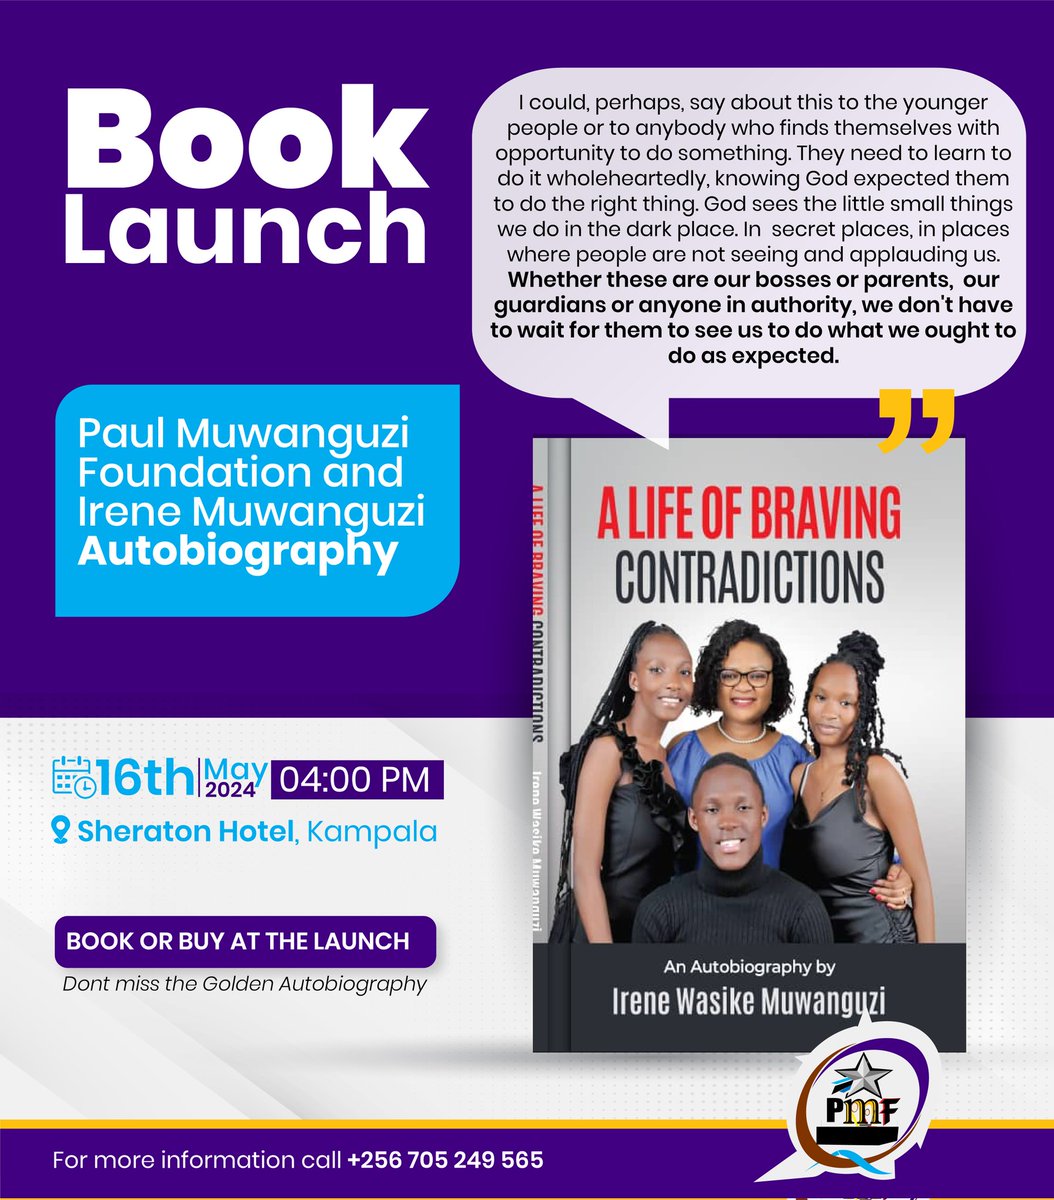 Empower yourself to fulfill expectations, regardless of who's watching . Join us at Sheraton Hotel on May 16th for the launch of 'A Life of Braving Contradictions'. Register for attendance and book purchase after the launch is via: muwanguzifund.com #SanyukaUpdates…